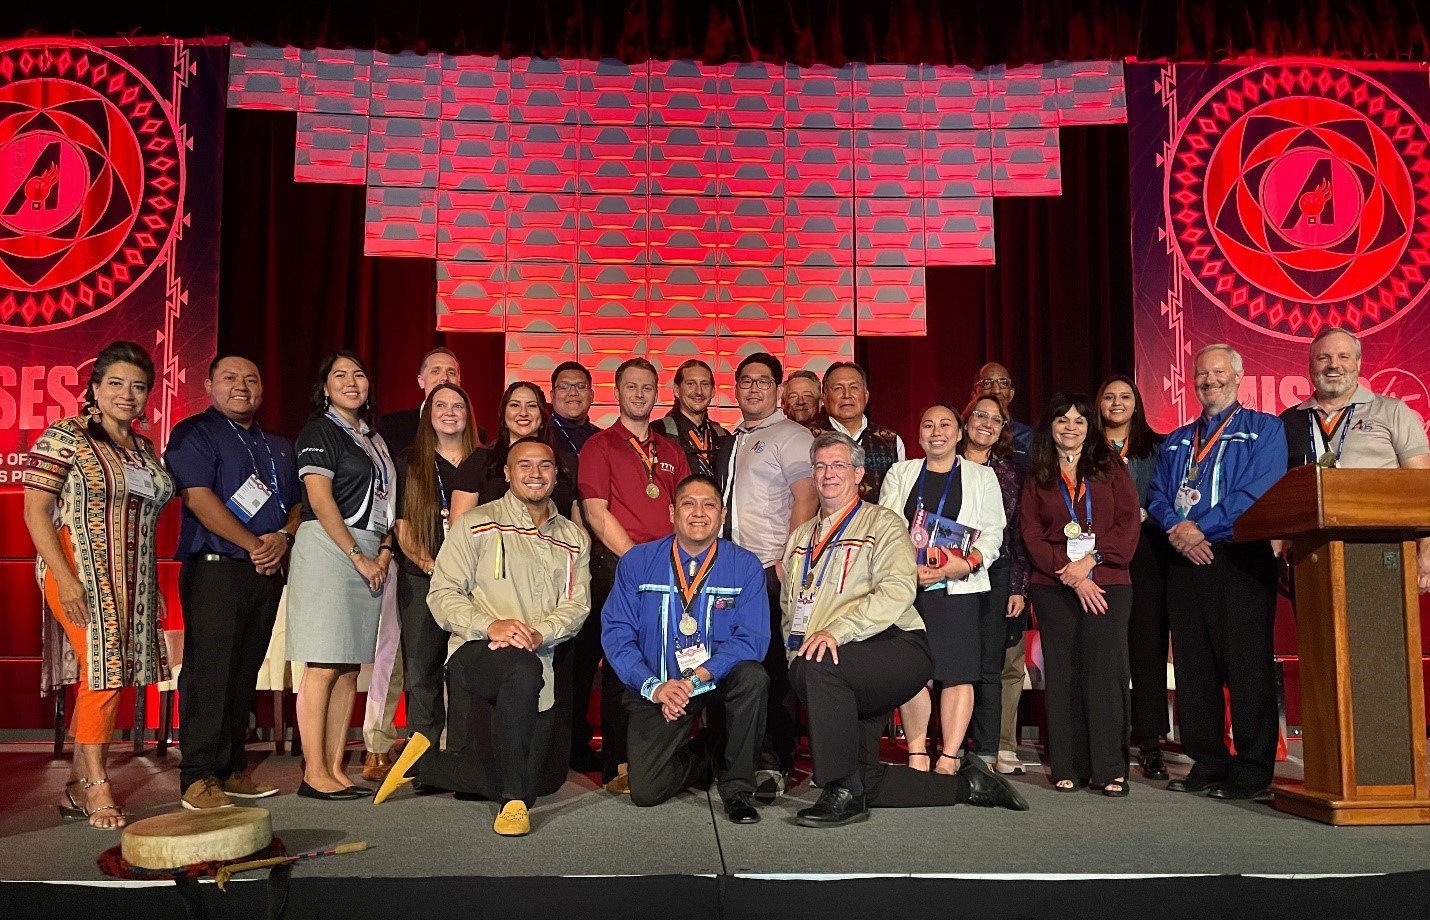 A group of Boeing employees are posing on stage at the American Indian Science & Engineering Society conference.